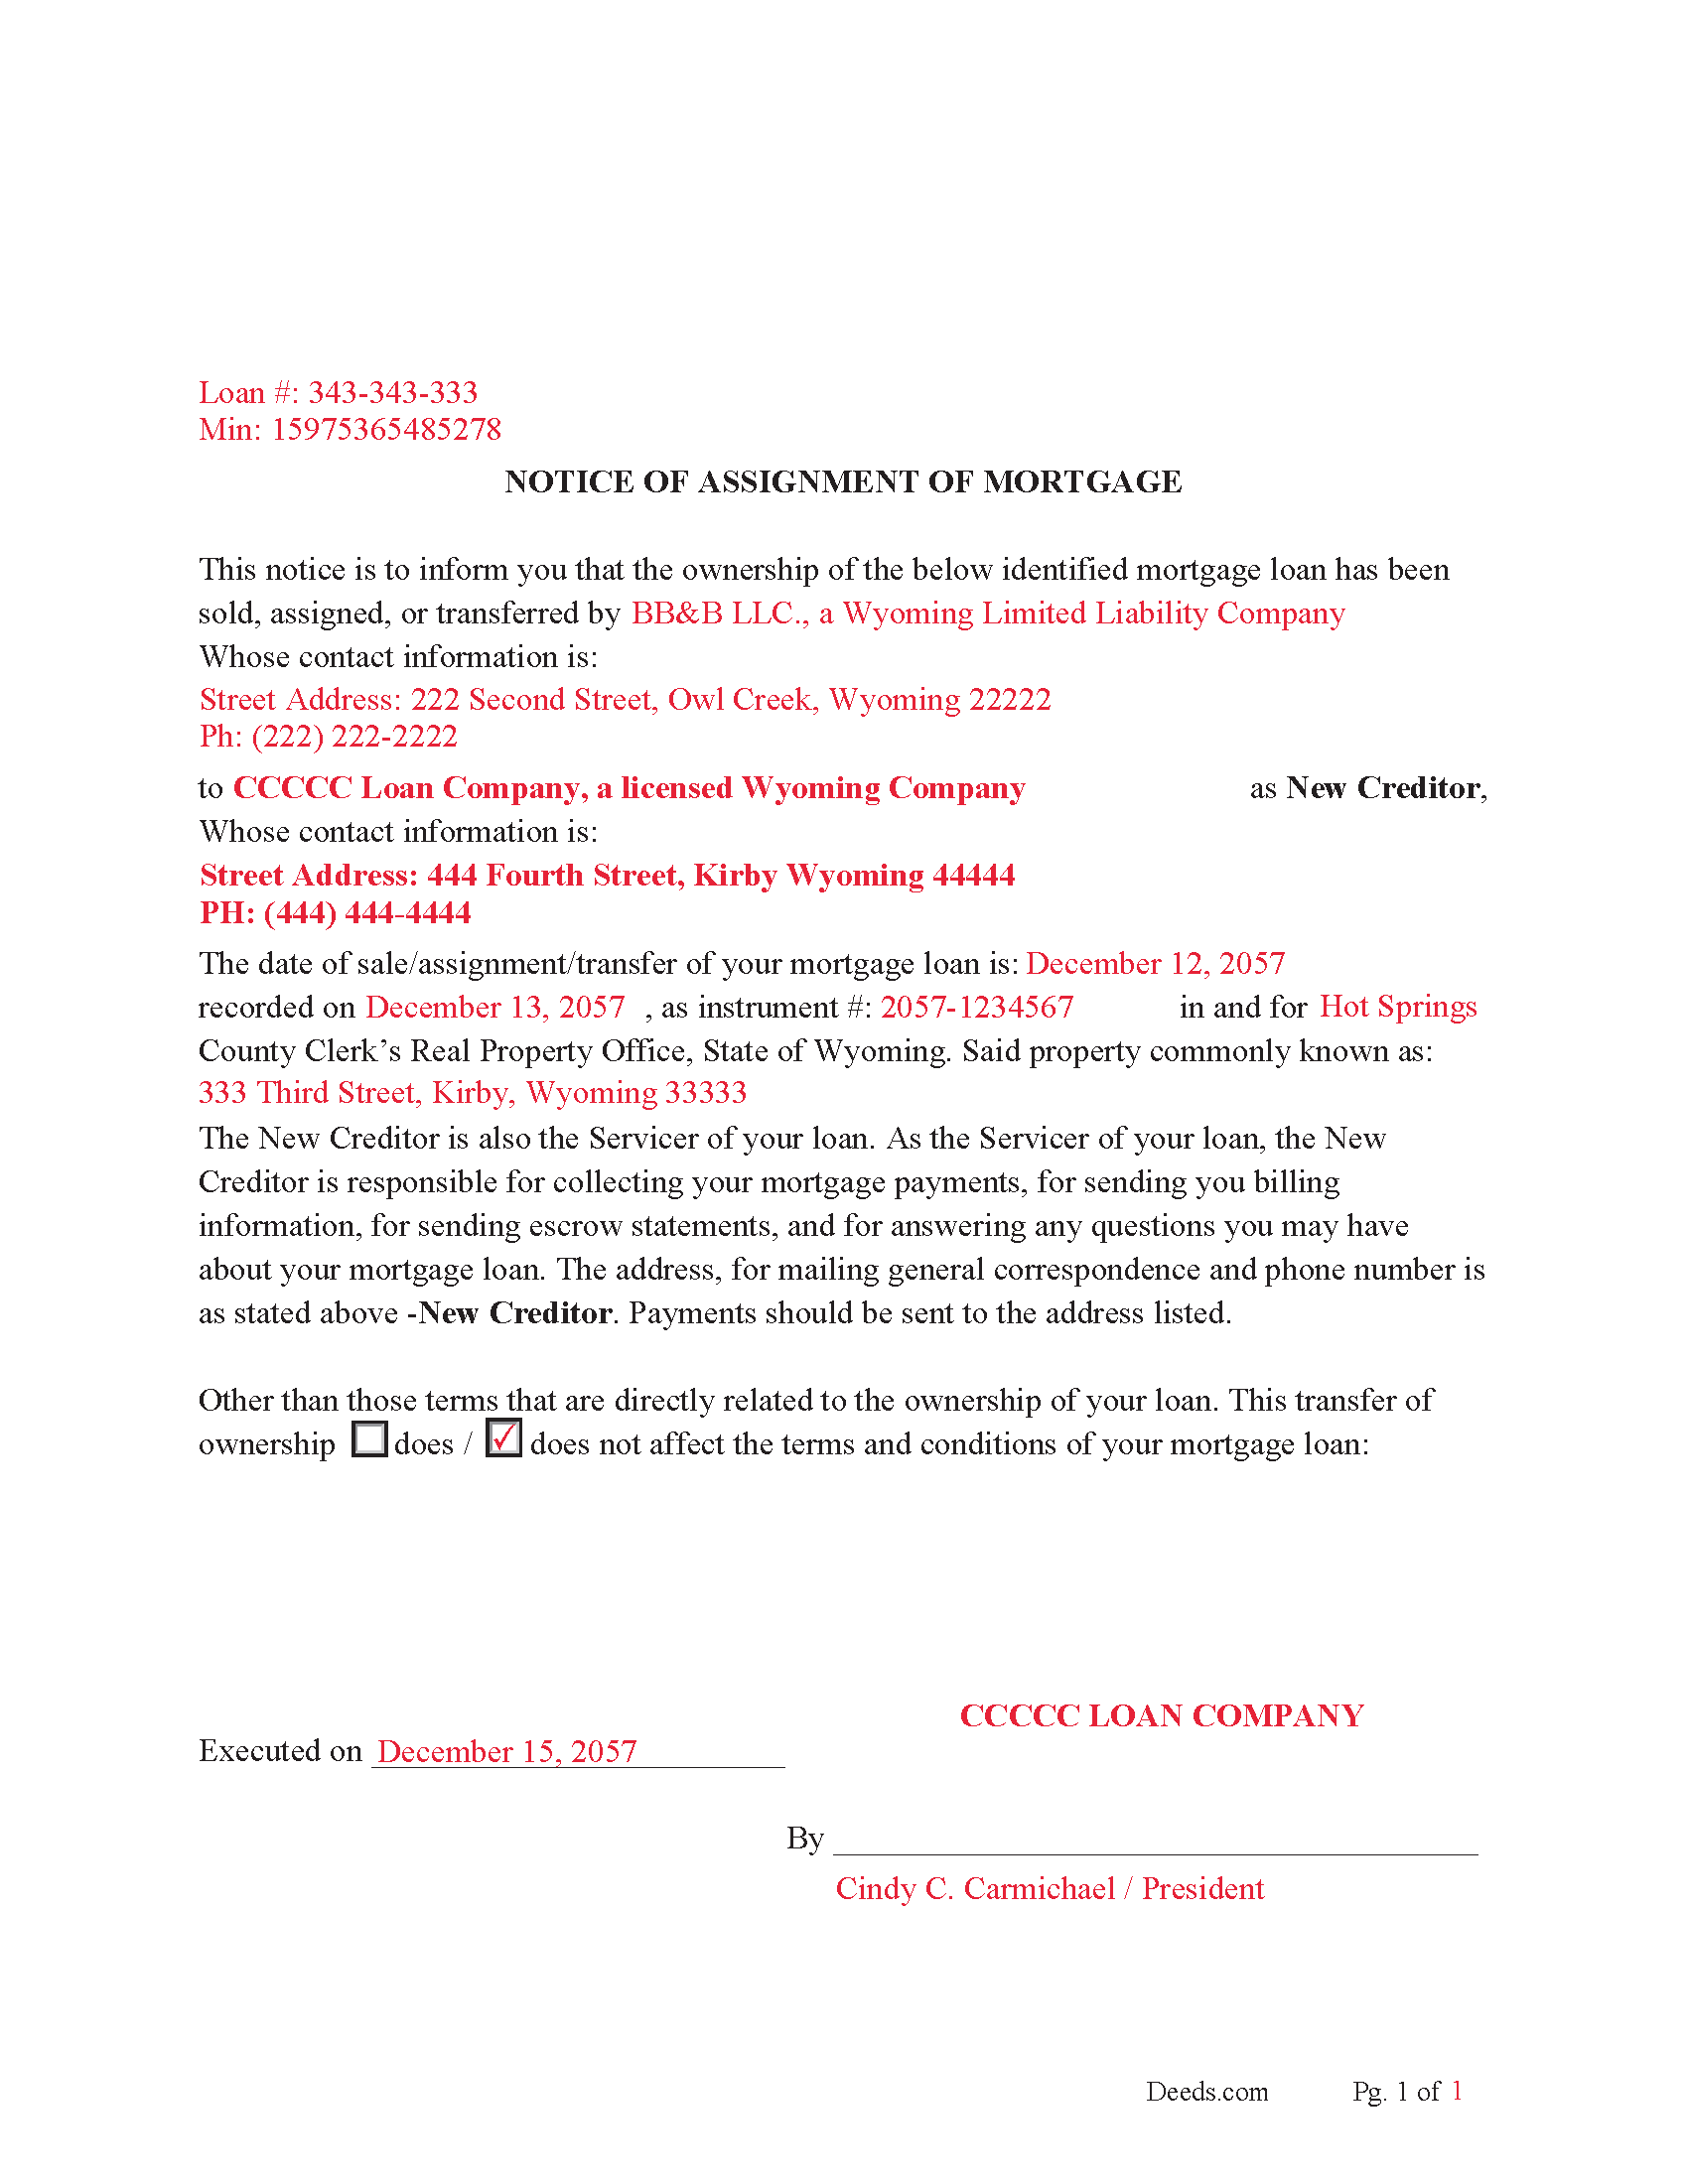 Completed Example of a Notice of Assignment Document